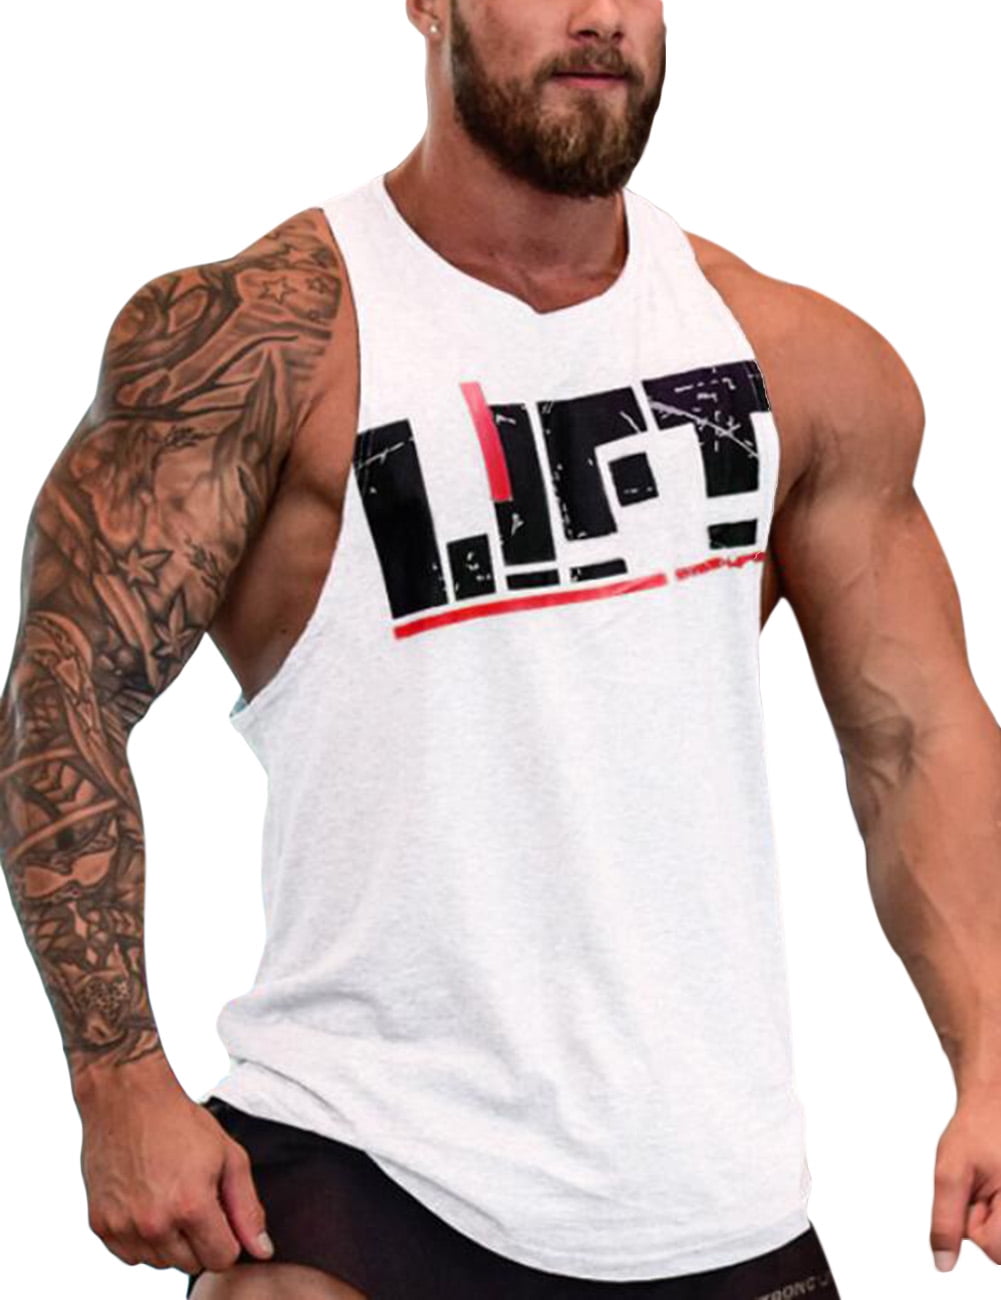 Mens  Muscle Fitness Vest Cotton Sleeveless Bodybuilding Tank Top